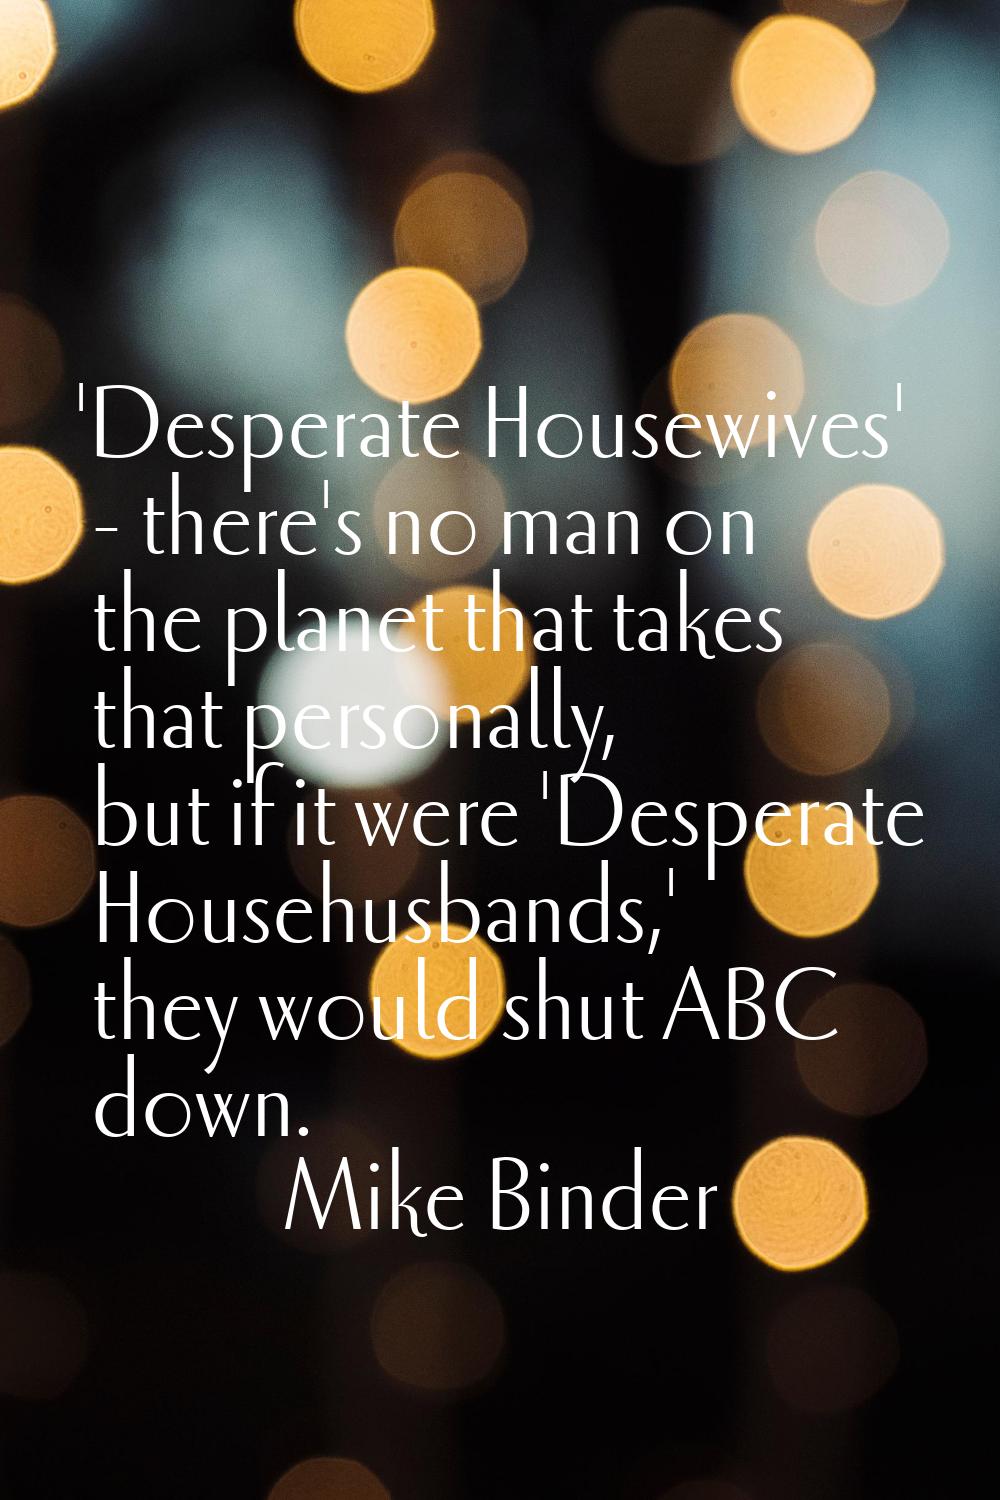 'Desperate Housewives' - there's no man on the planet that takes that personally, but if it were 'D